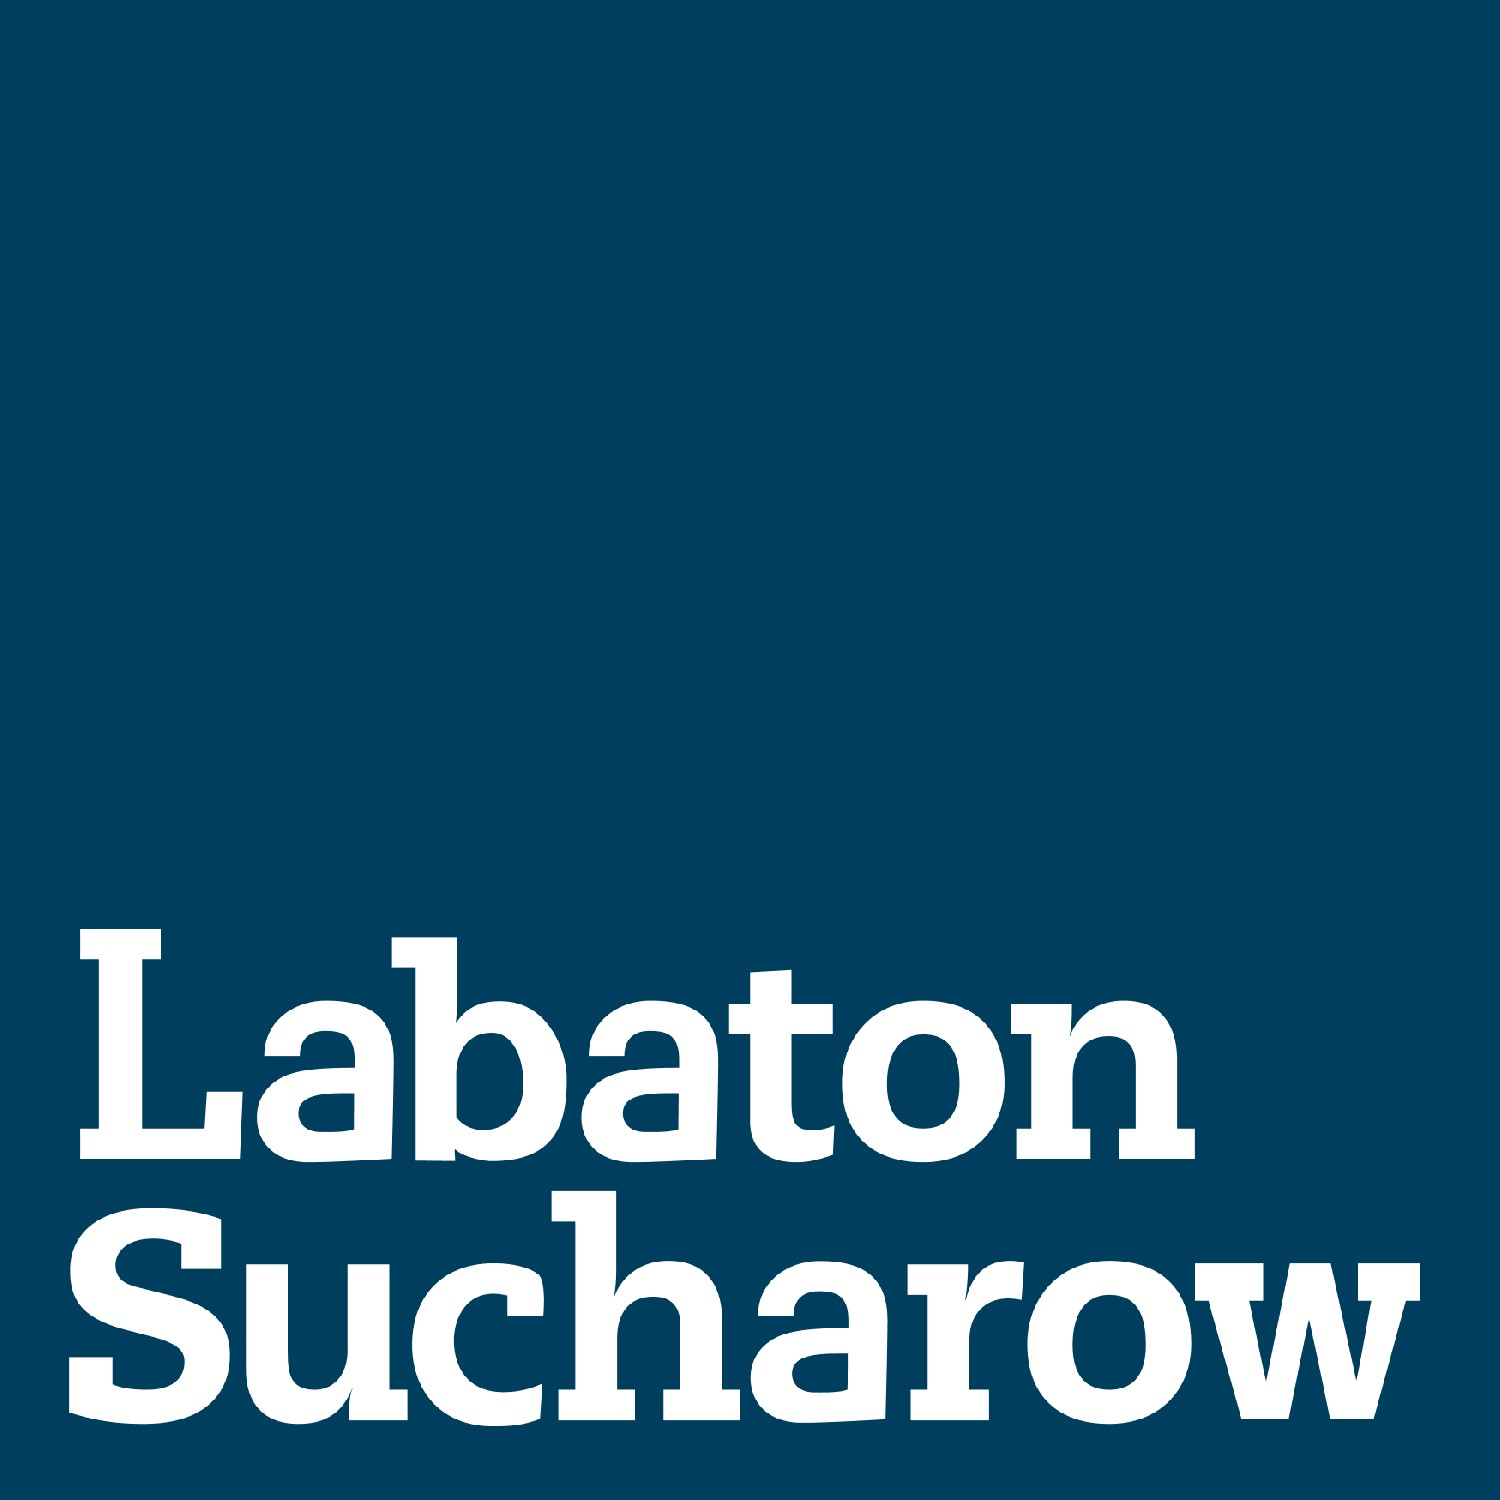 Labaton Sucharow LLP, Tuesday, March 2, 2021, Press release picture